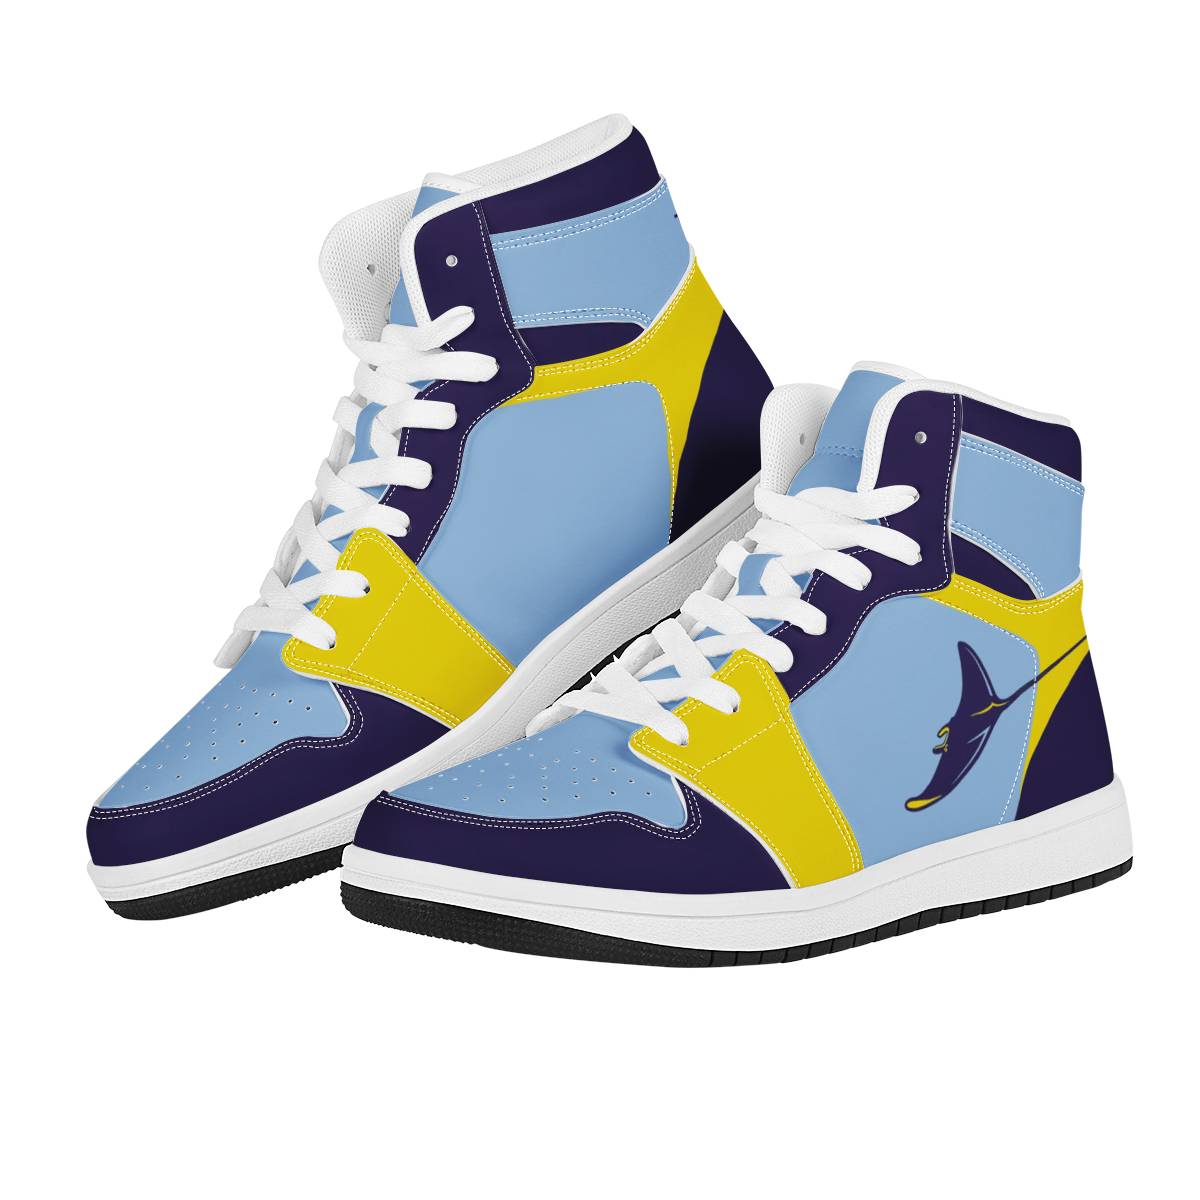 Men's Tampa Bay Rays High Top Leather AJ1 Sneakers 002